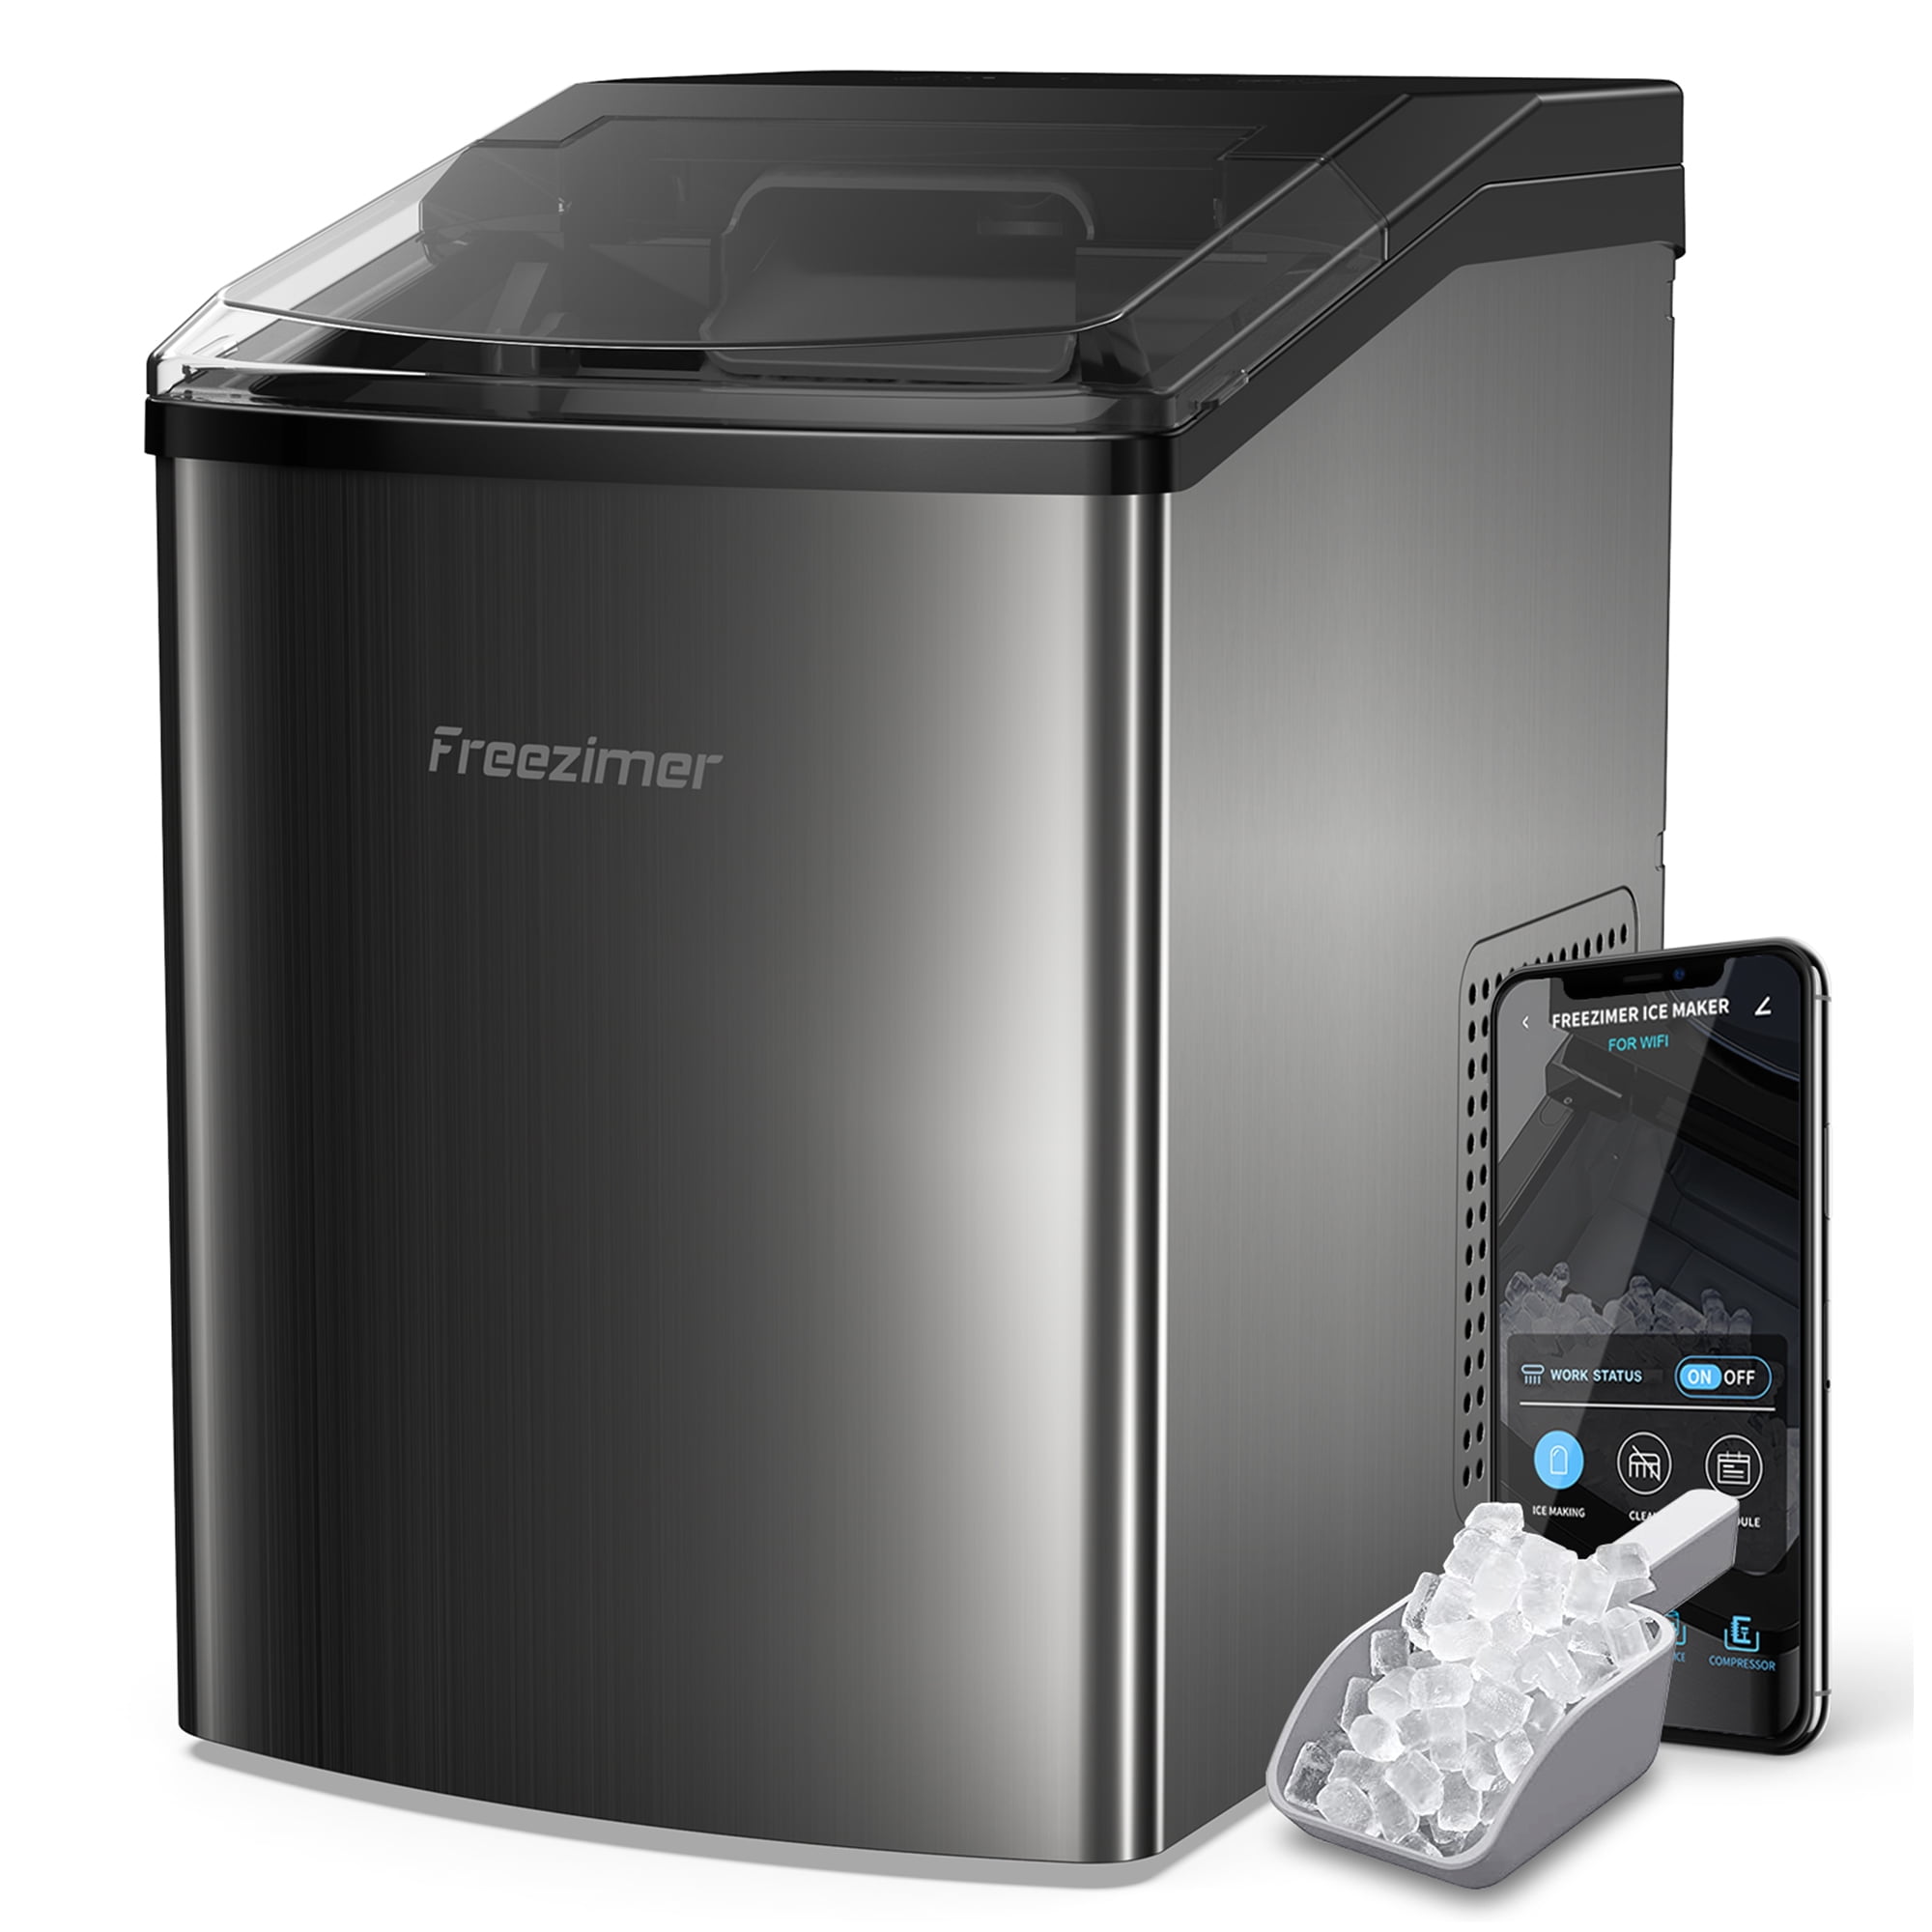 Freezimer DIM-30A Ice Maker Machine Nugget Ice for Home, Pellet